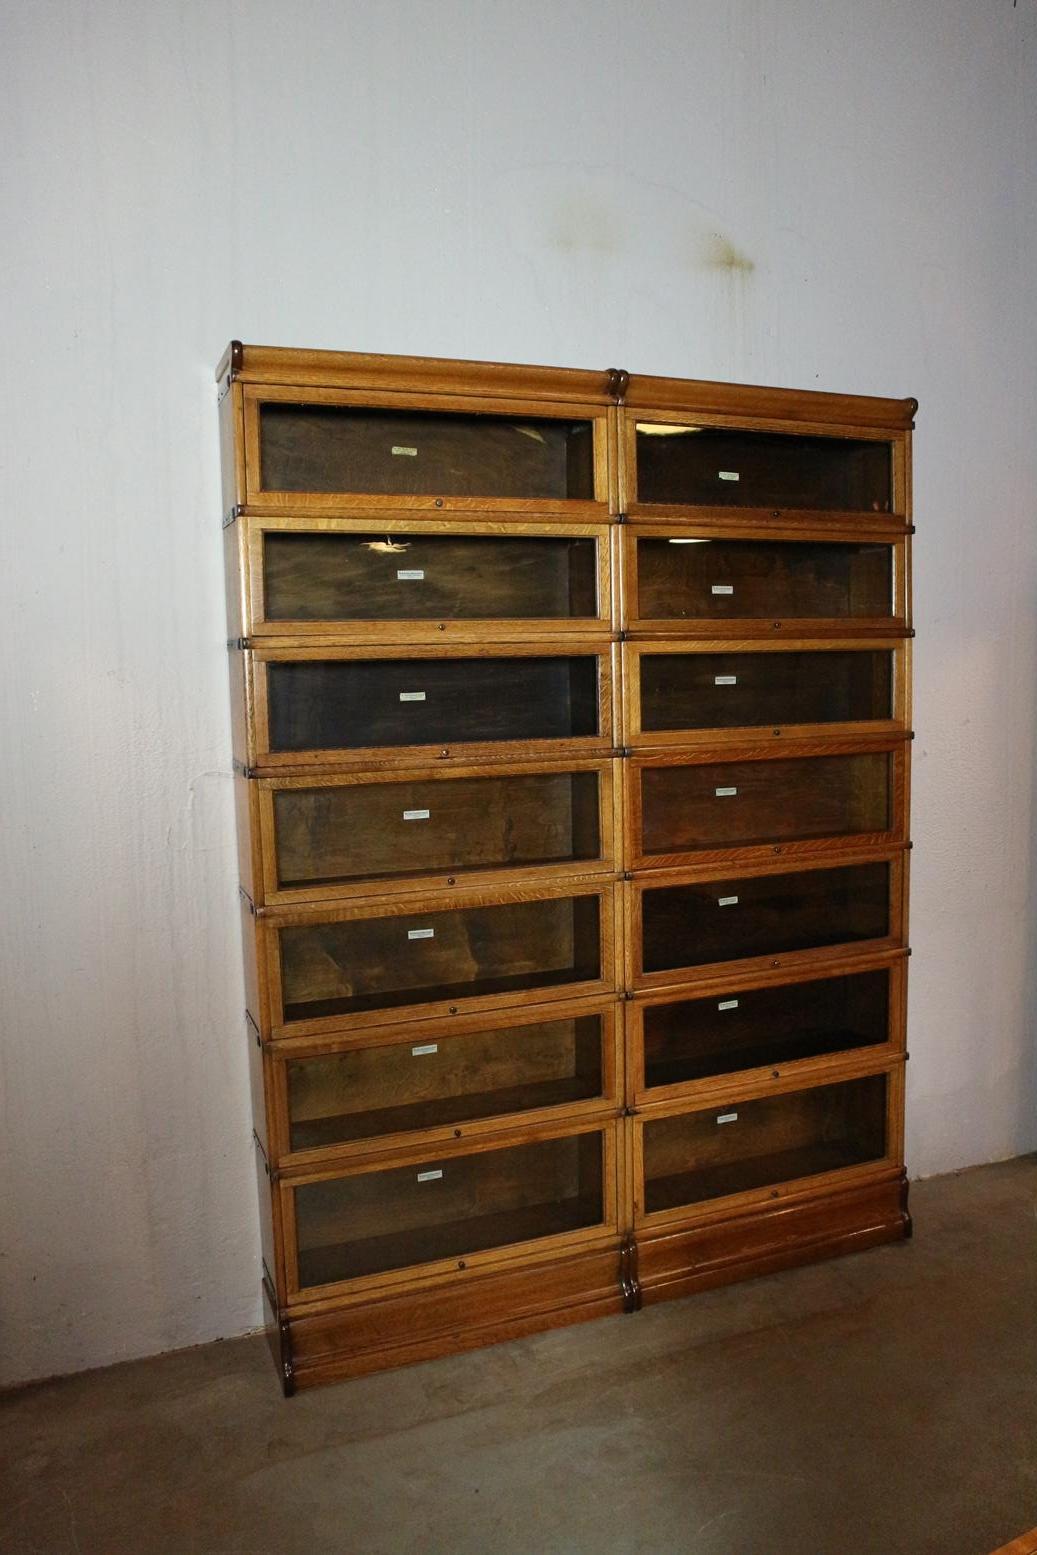 Oak Globe Wernicke bookcase in good original condition. Br. 172cm, H. 227, D.25cm This cabinet consists of 18 stackable parts. These are stackable bookcases that can be placed in different positions.

Origin: England, London

Period: